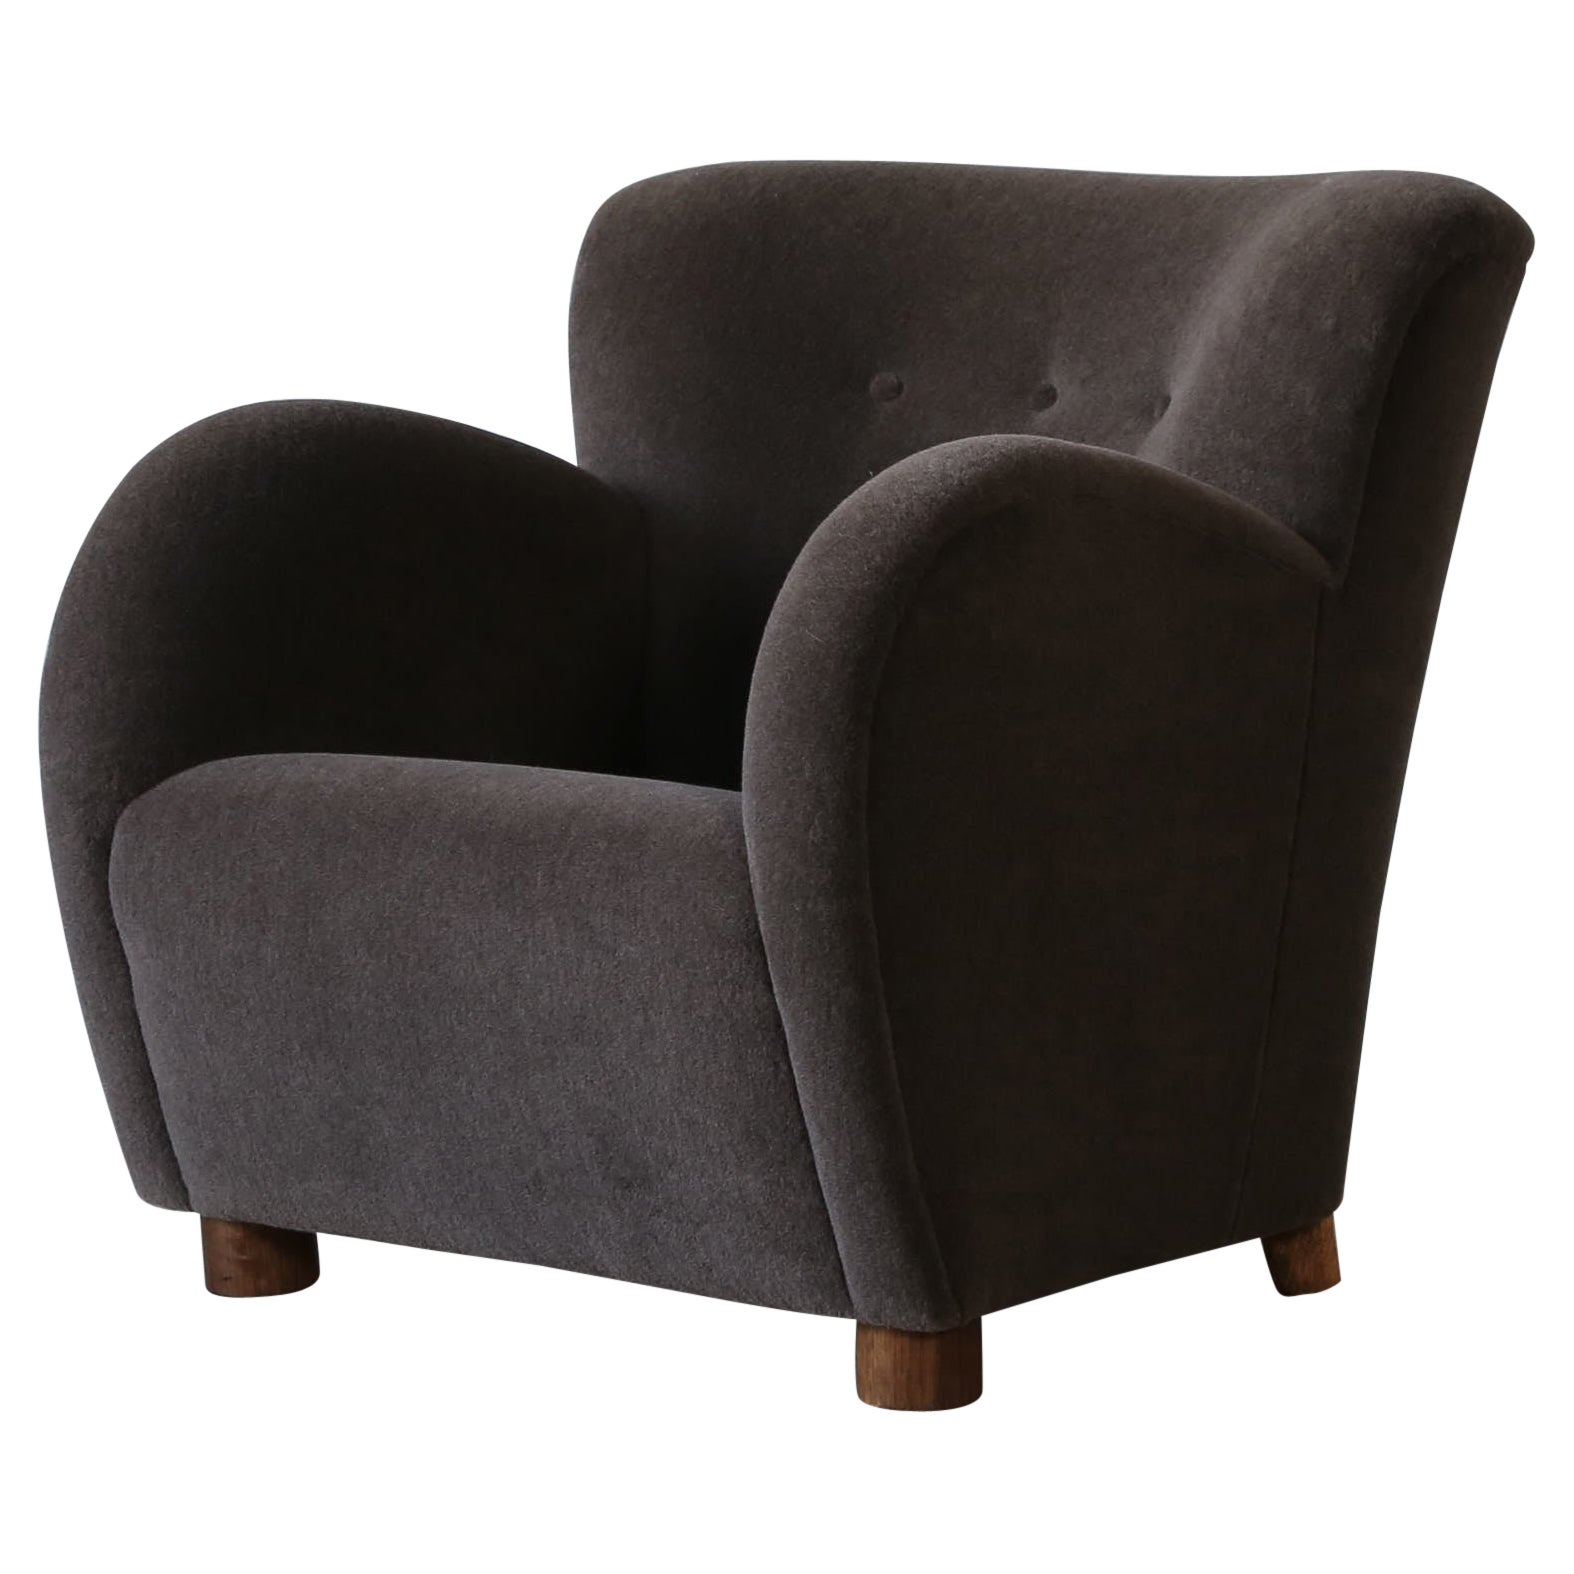 Superb Lounge Chair, Upholstered in Pure Alpaca